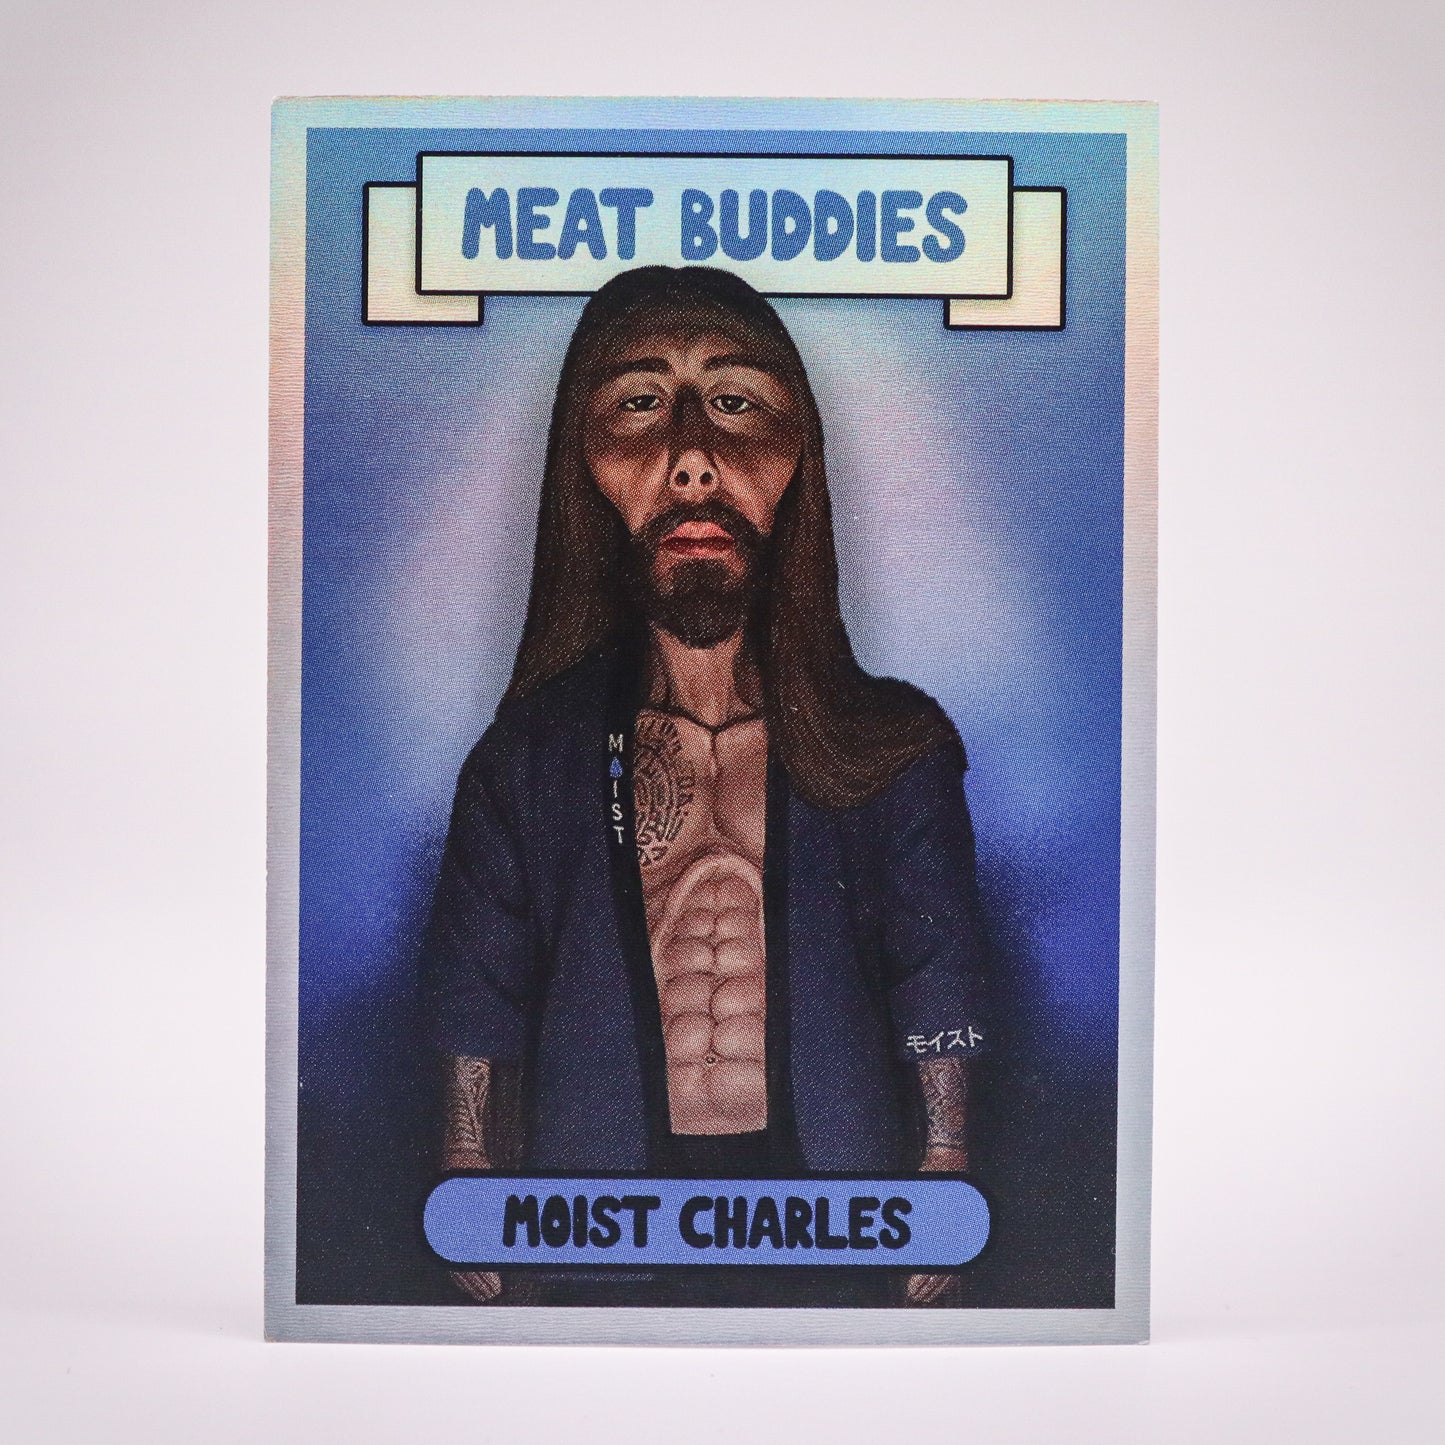 MeatCanyon x TRDNG Meat Buddies Series 1